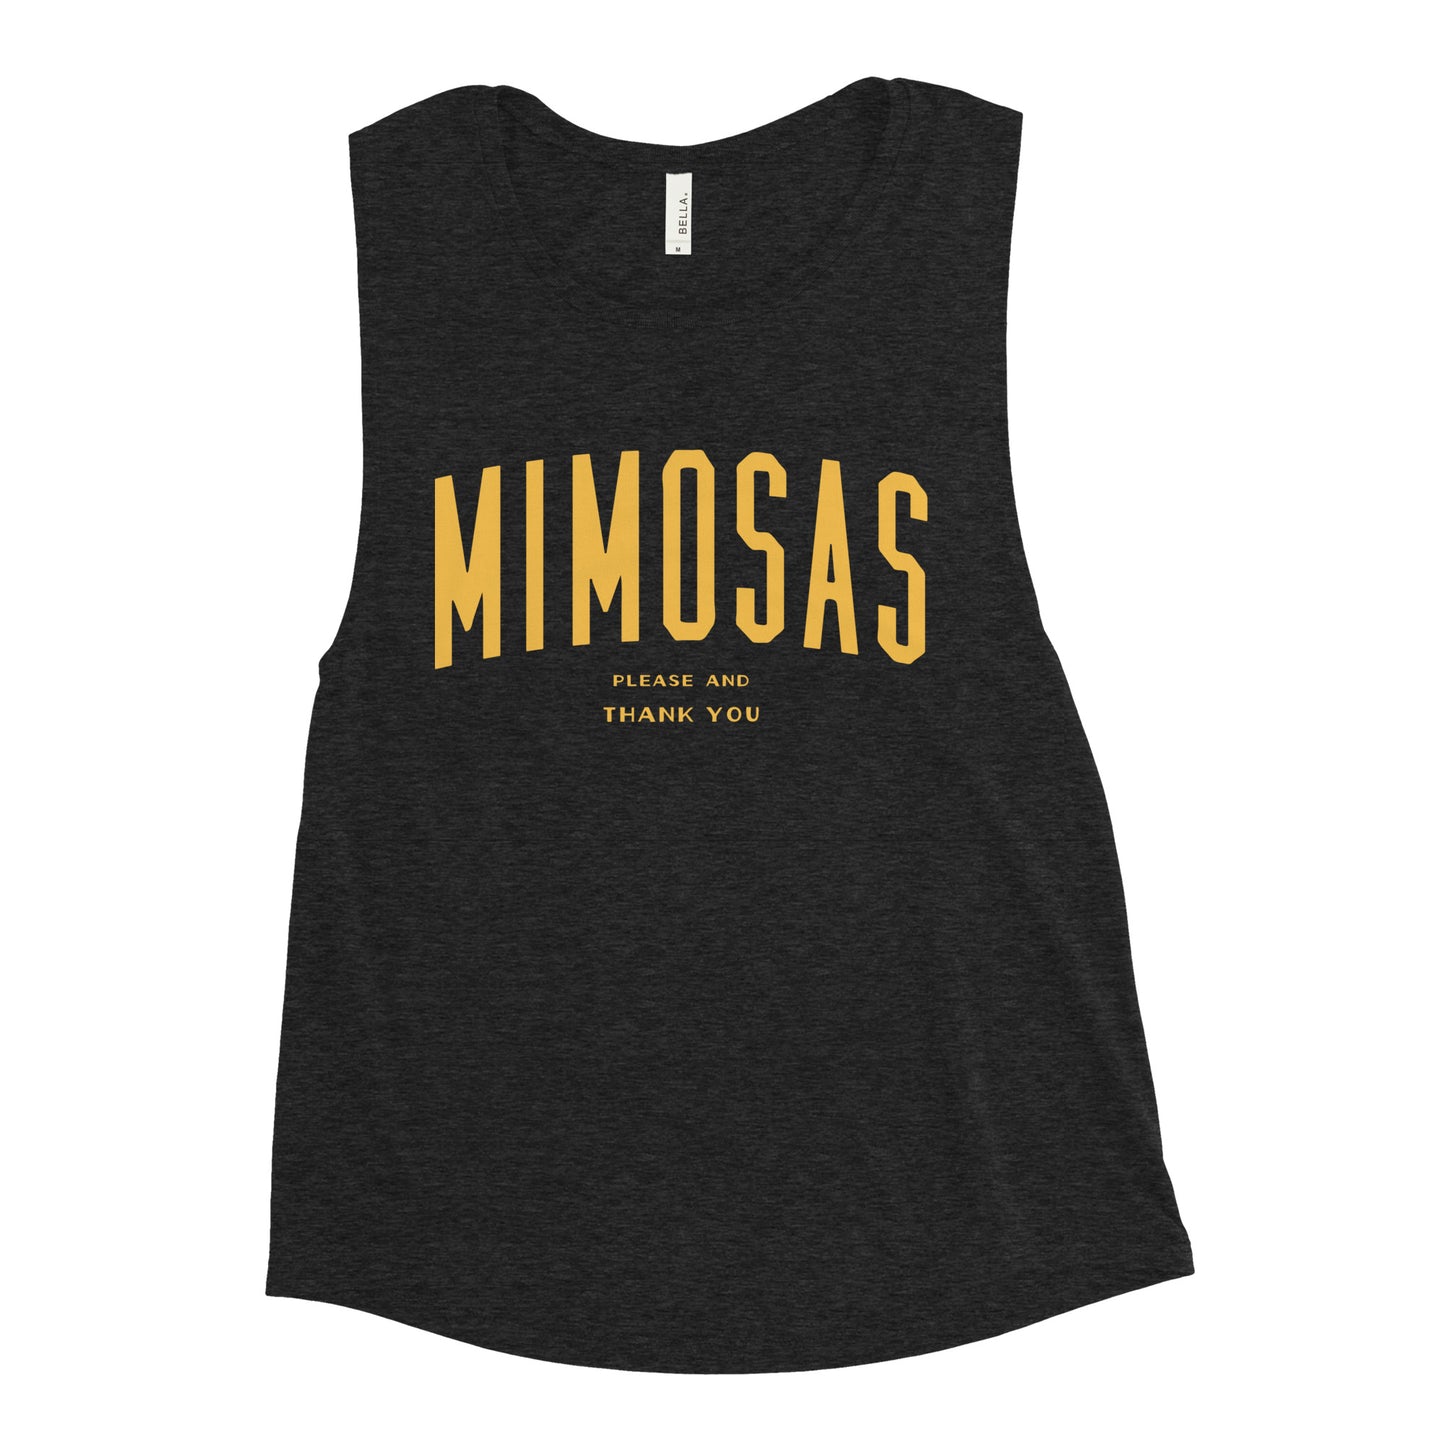 Mimosas Please And Thank You Women's Muscle Tank